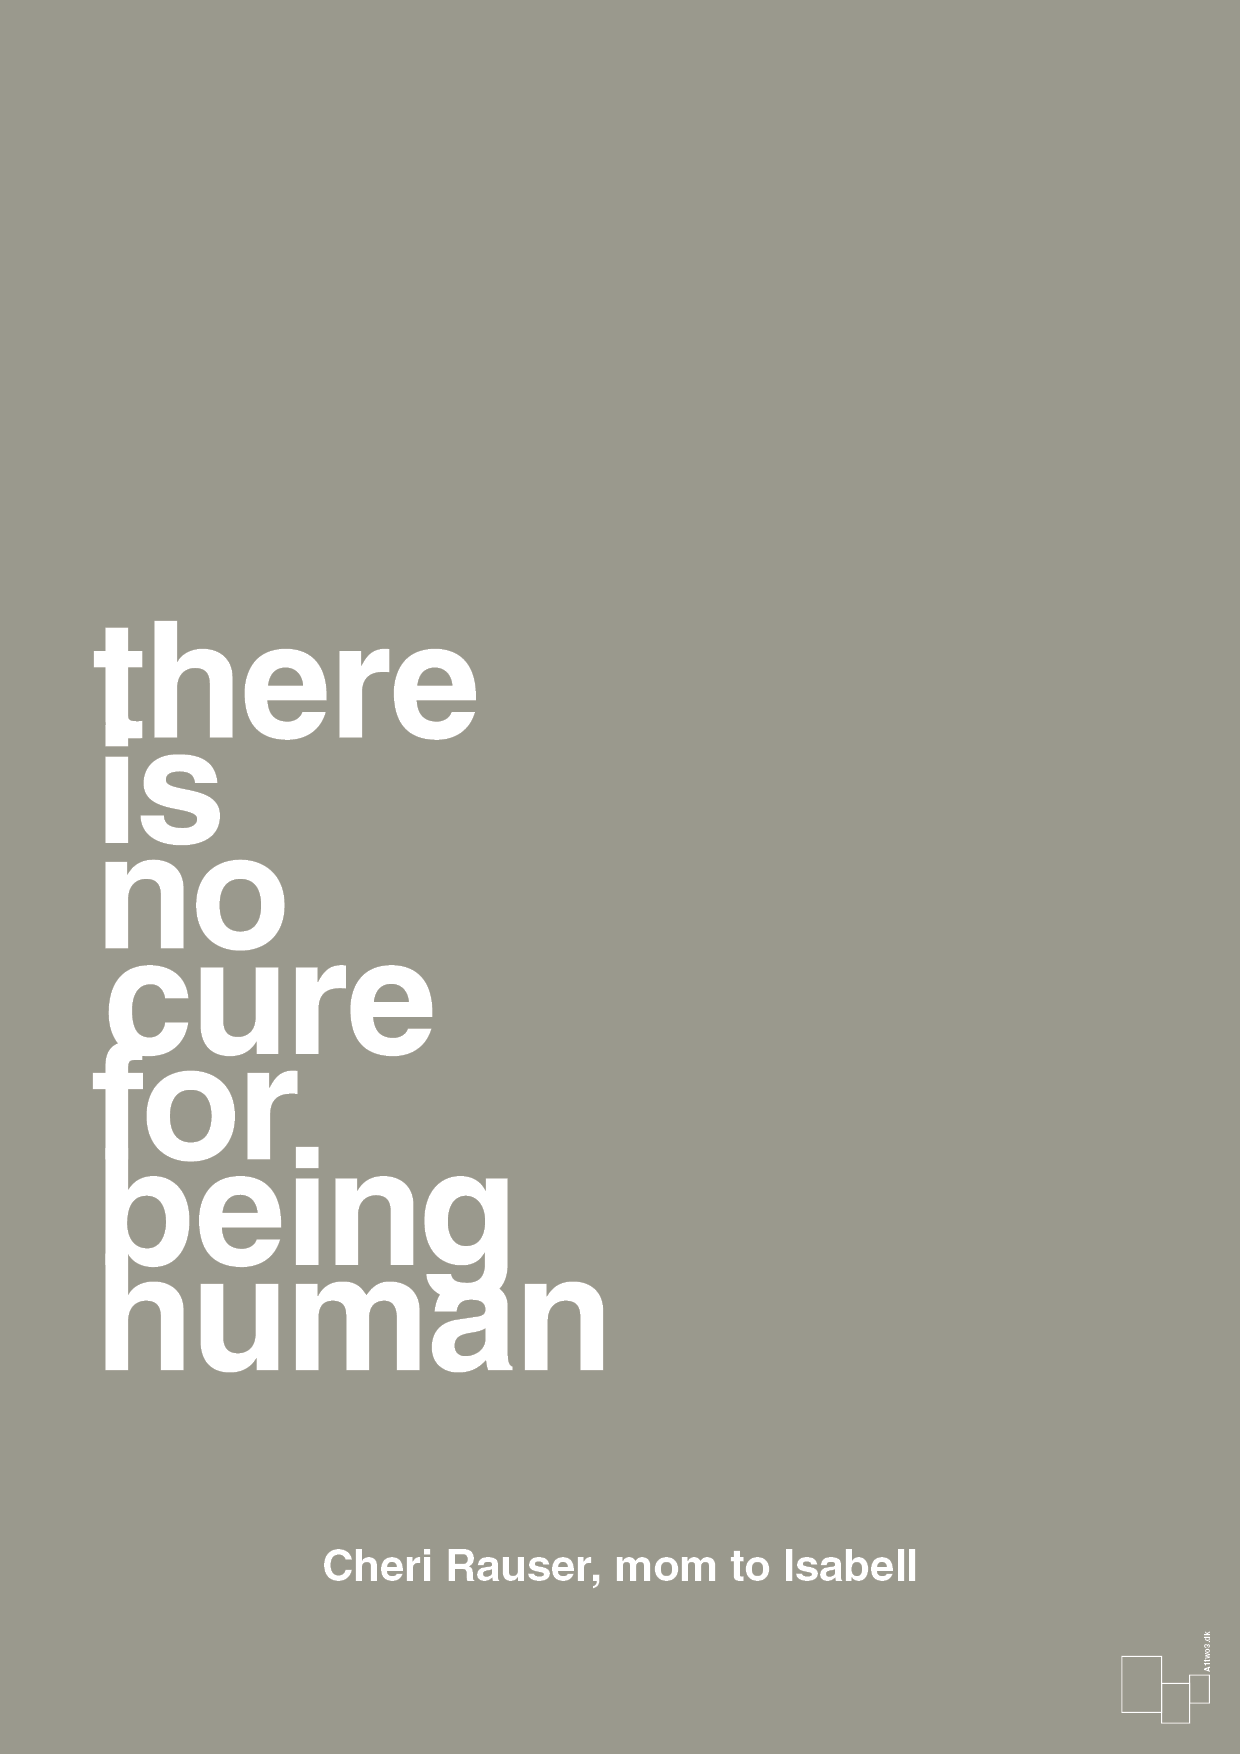 there is no cure for being human - Plakat med Samfund i Battleship Gray